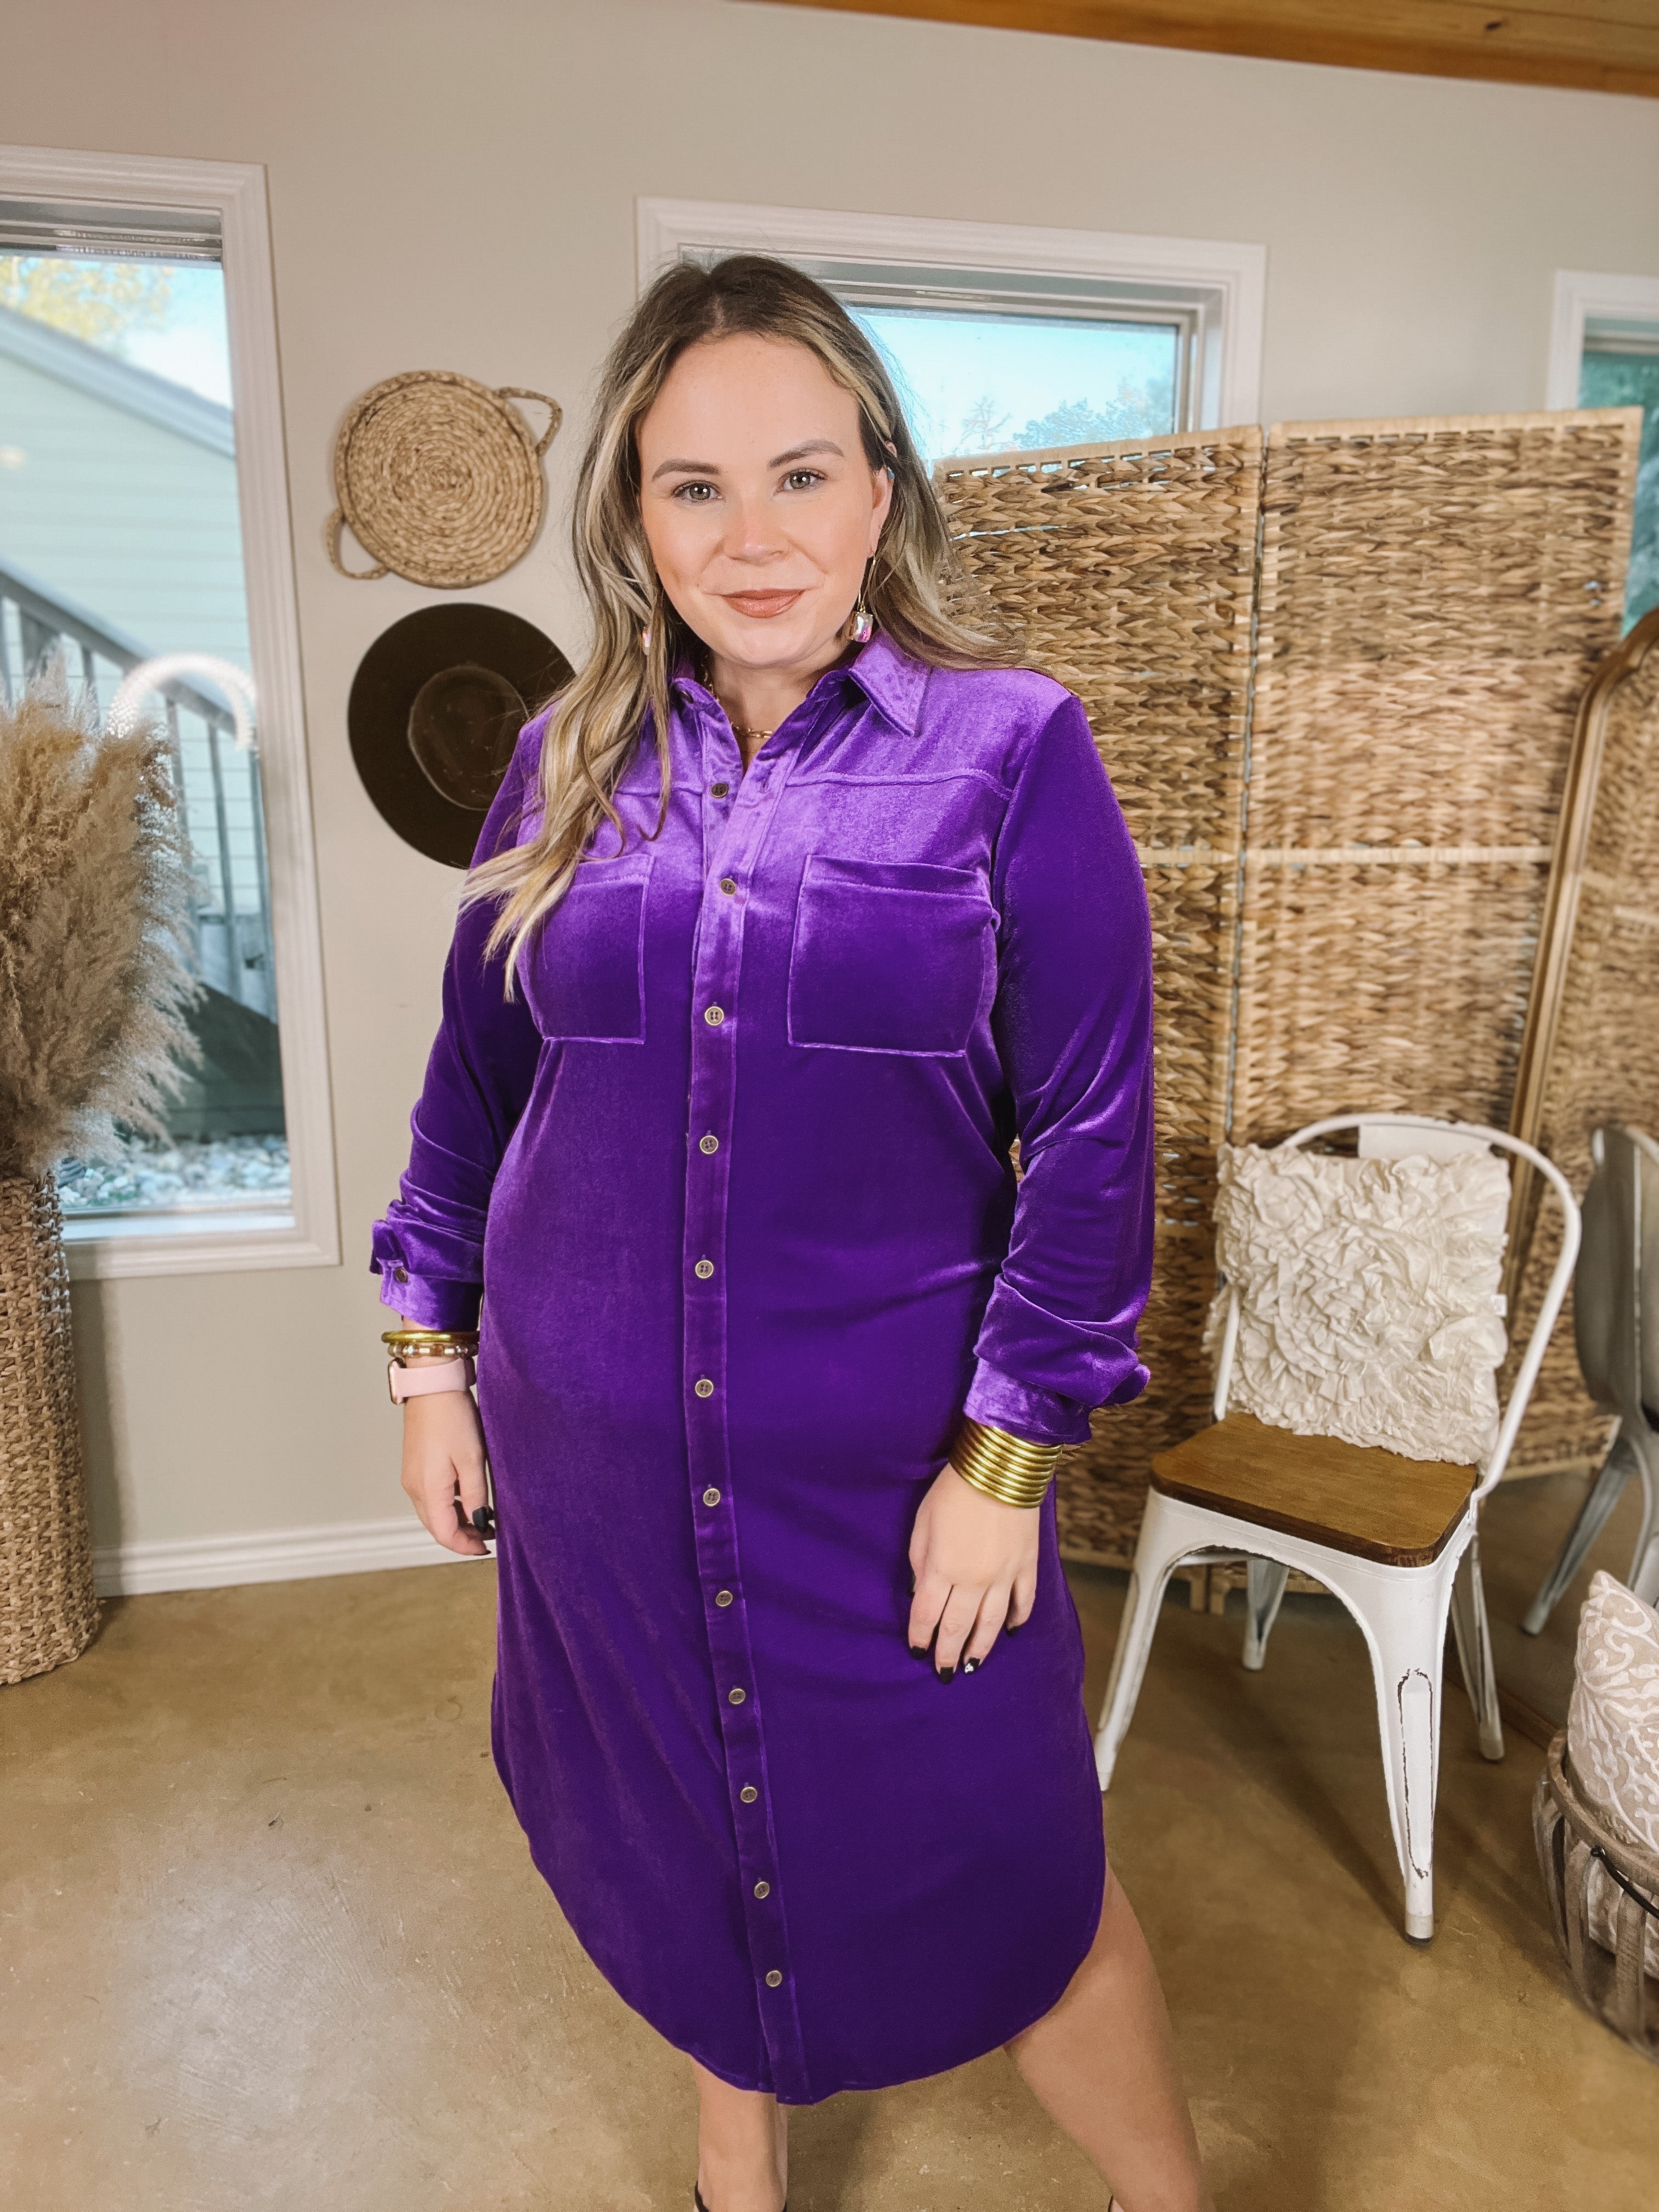 London Fog Velvet Button Up Midi Dress with Long Sleeves in Purple - Giddy Up Glamour Boutique